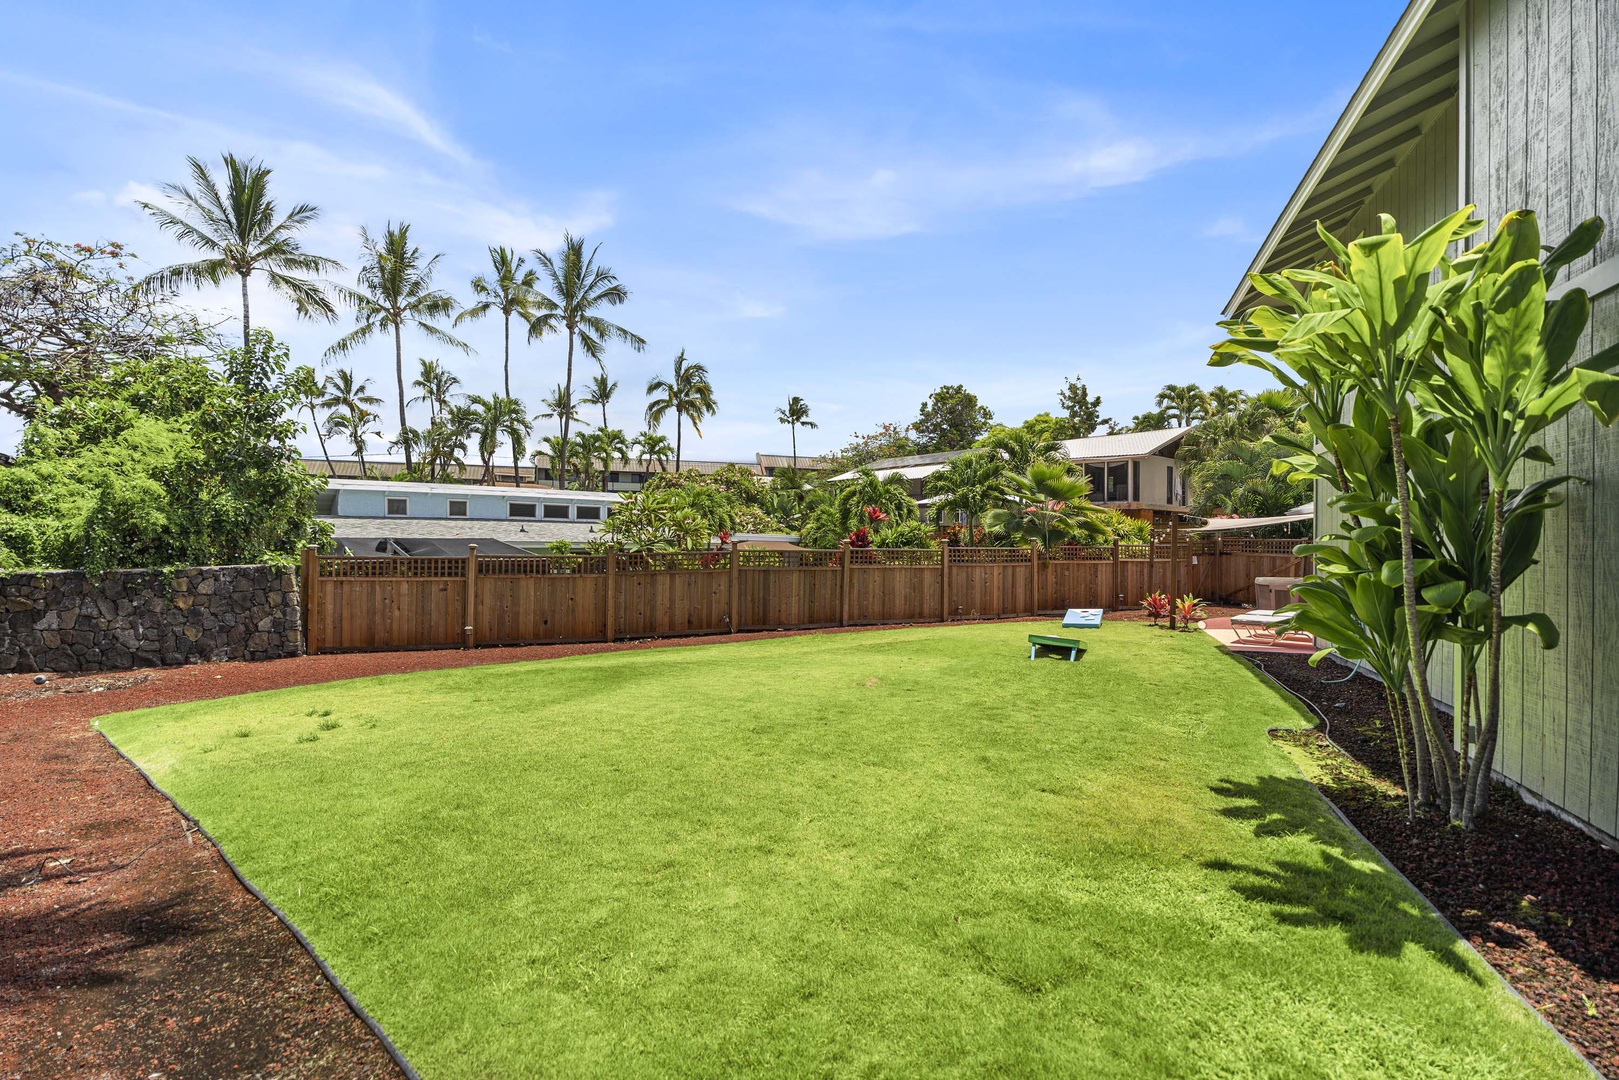 Kailua Kona Vacation Rentals, Hale A Kai - Blue skies and green grass what more could you ask for!